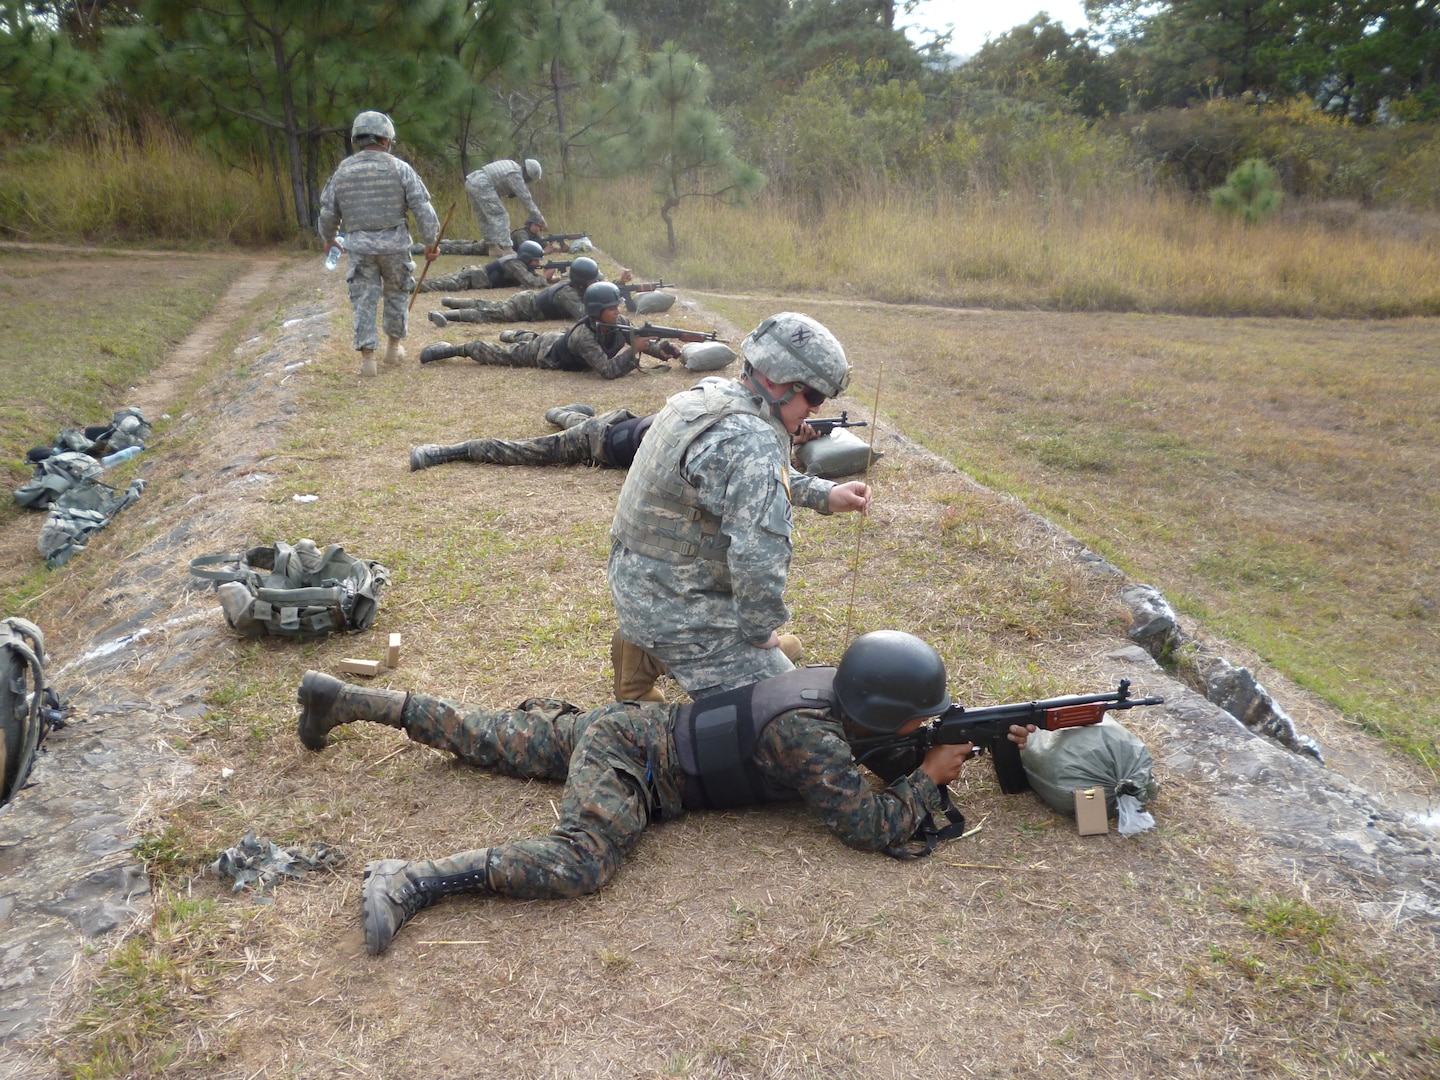 A Georgia Army National Guard member coaches a Soldier with the Guatemalan Interagency Task Force on proper firing techniques in order to build capacity and to enhance their capability in combating transnational criminal organizations and drug trafficking organizations. The activity occurred in March, 2014.